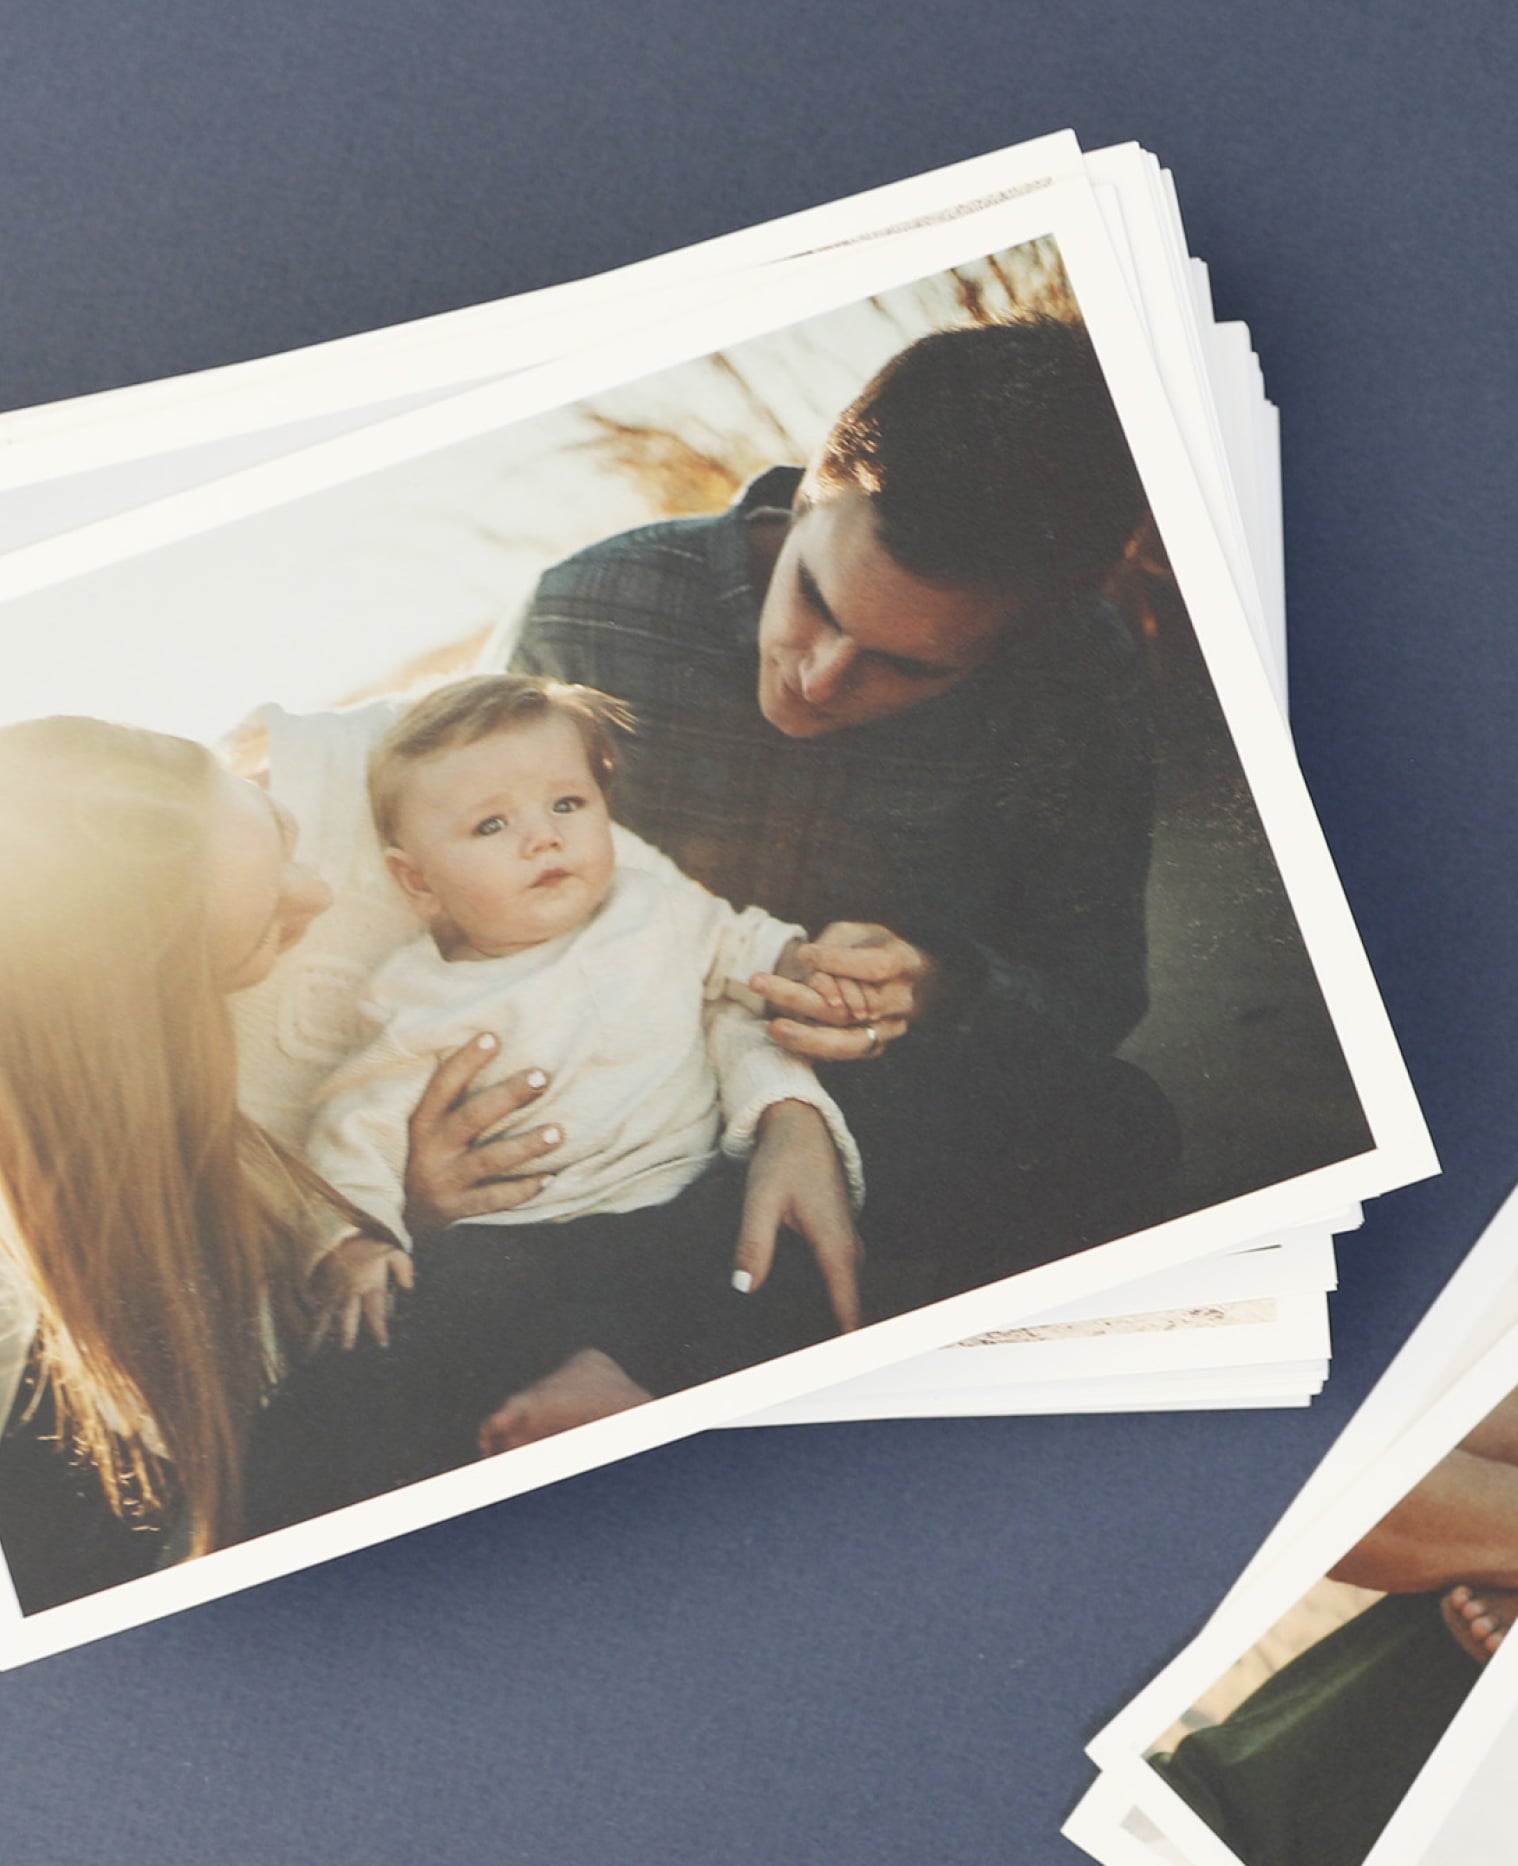 Stacked prints from Everyday Print Set showcasing family photo